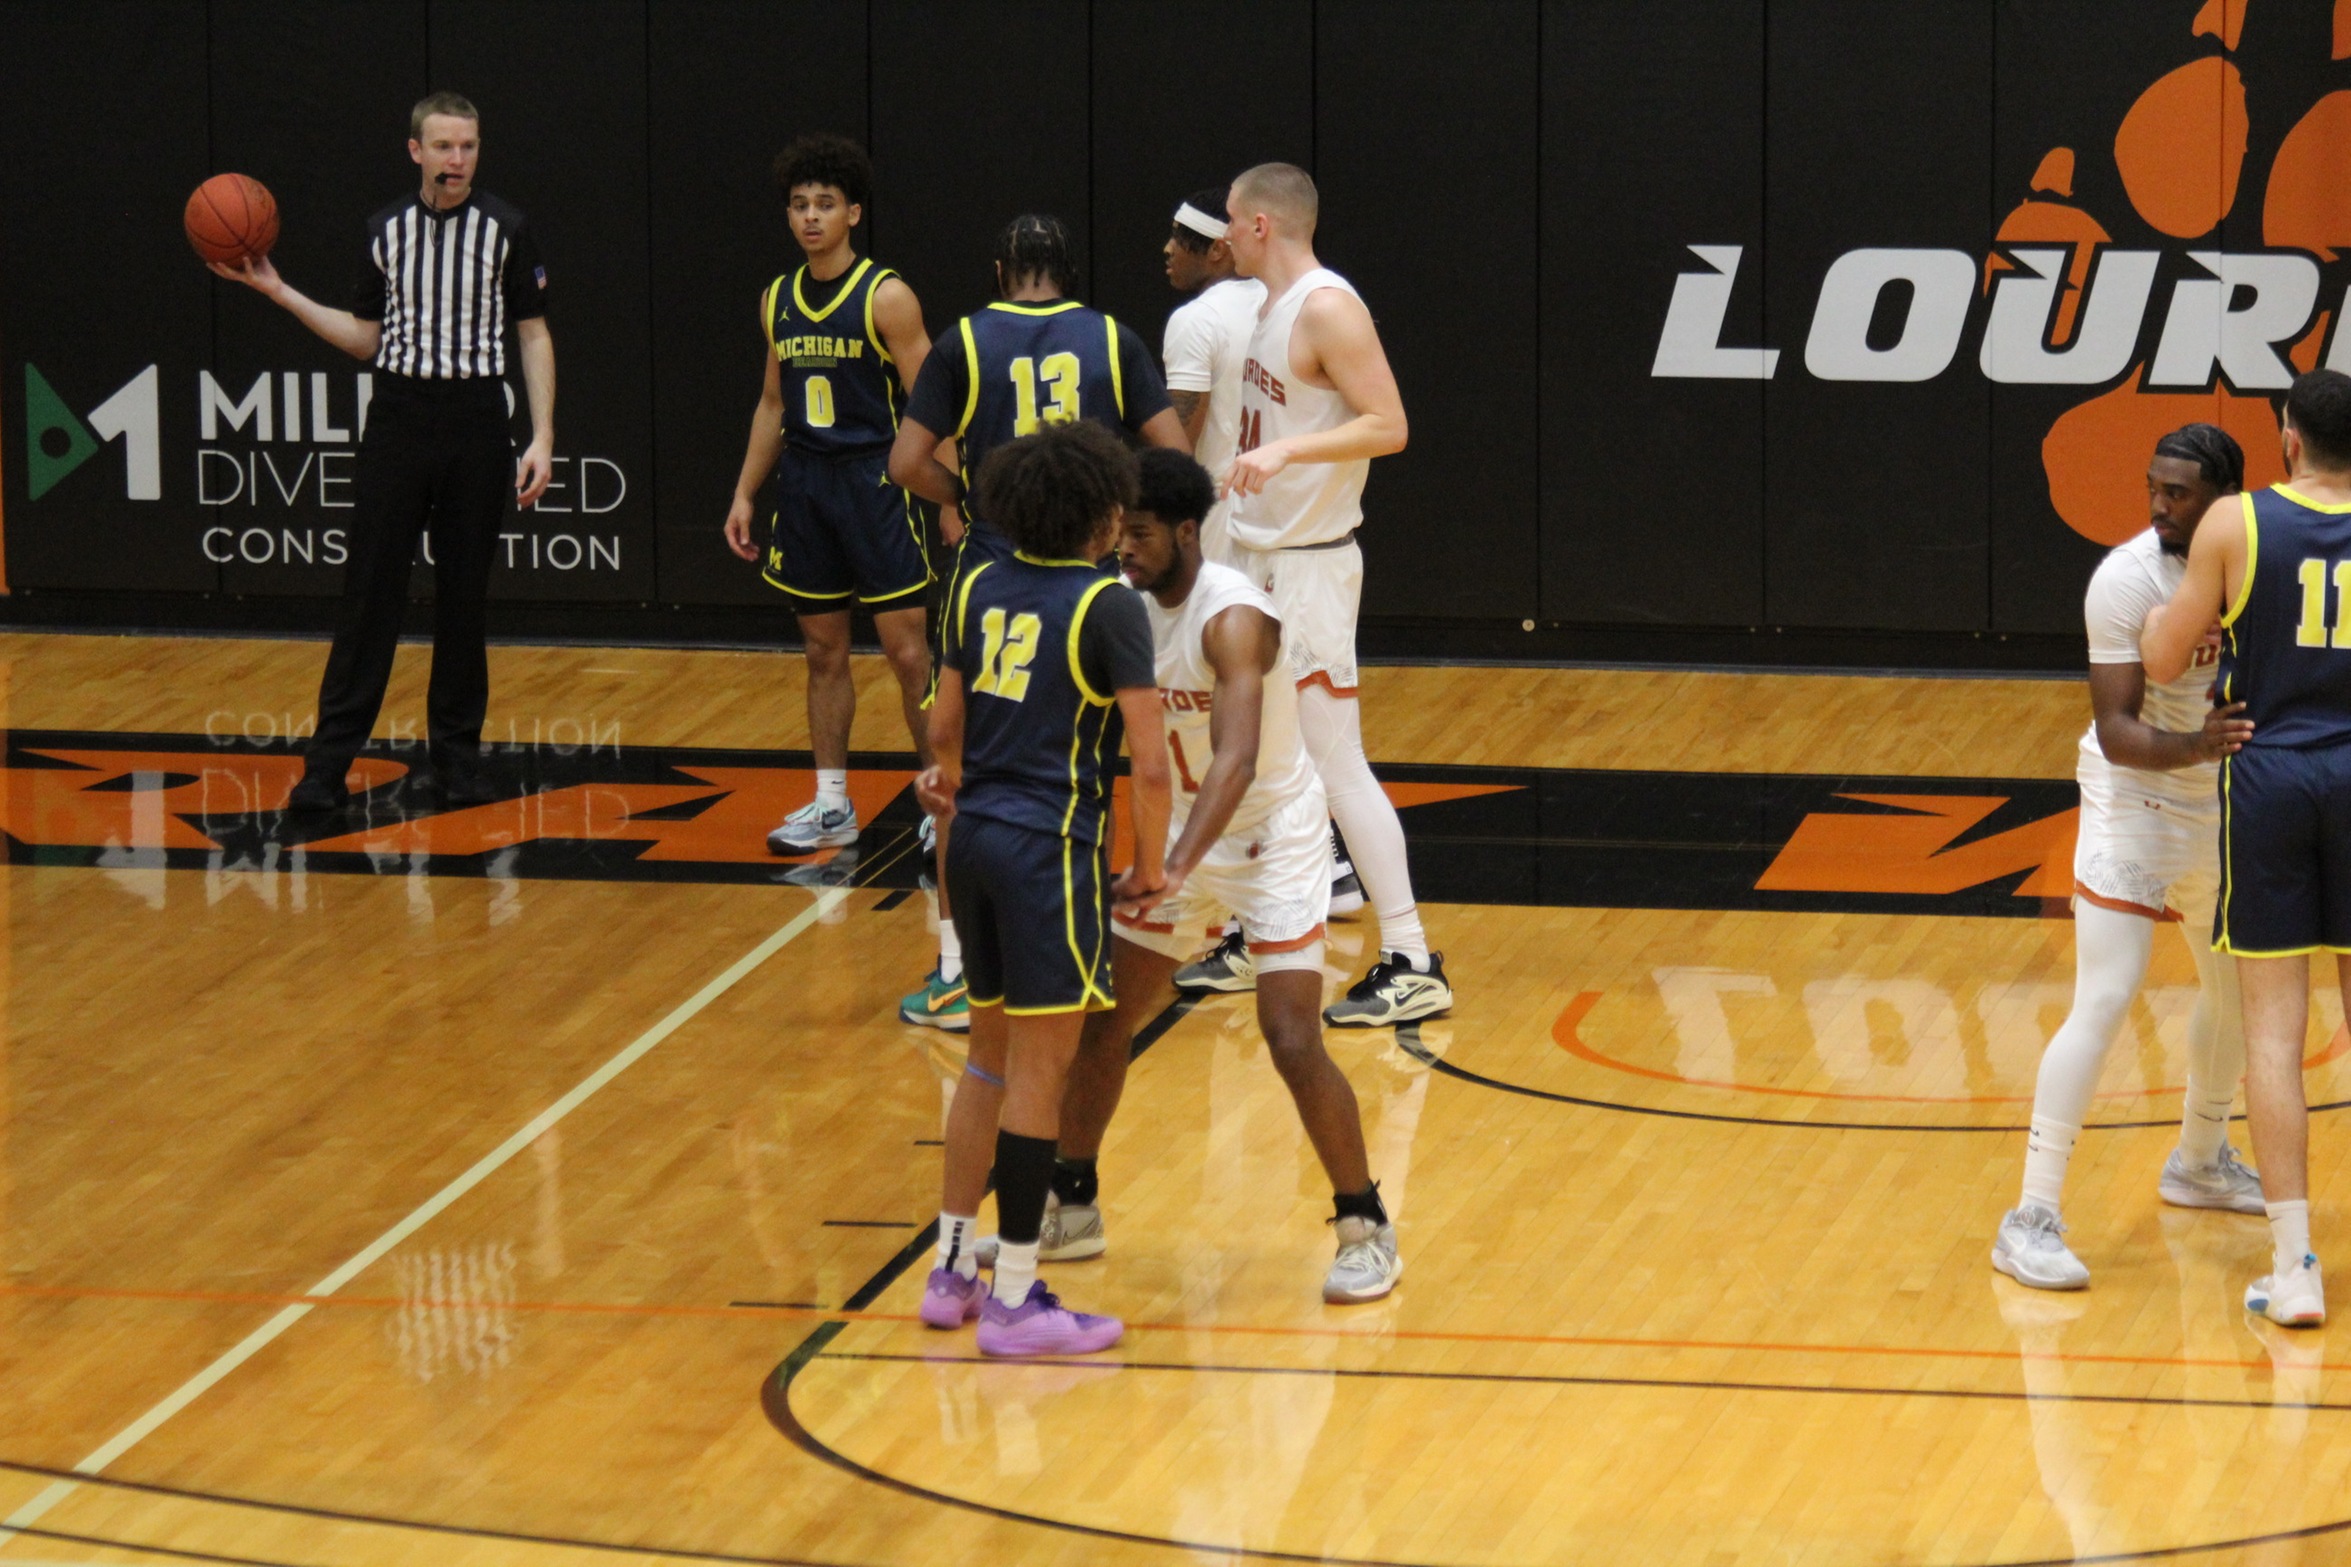 Mohamed and Leamy Lead Wolverines with 19 Points Against No. 10 Lourdes